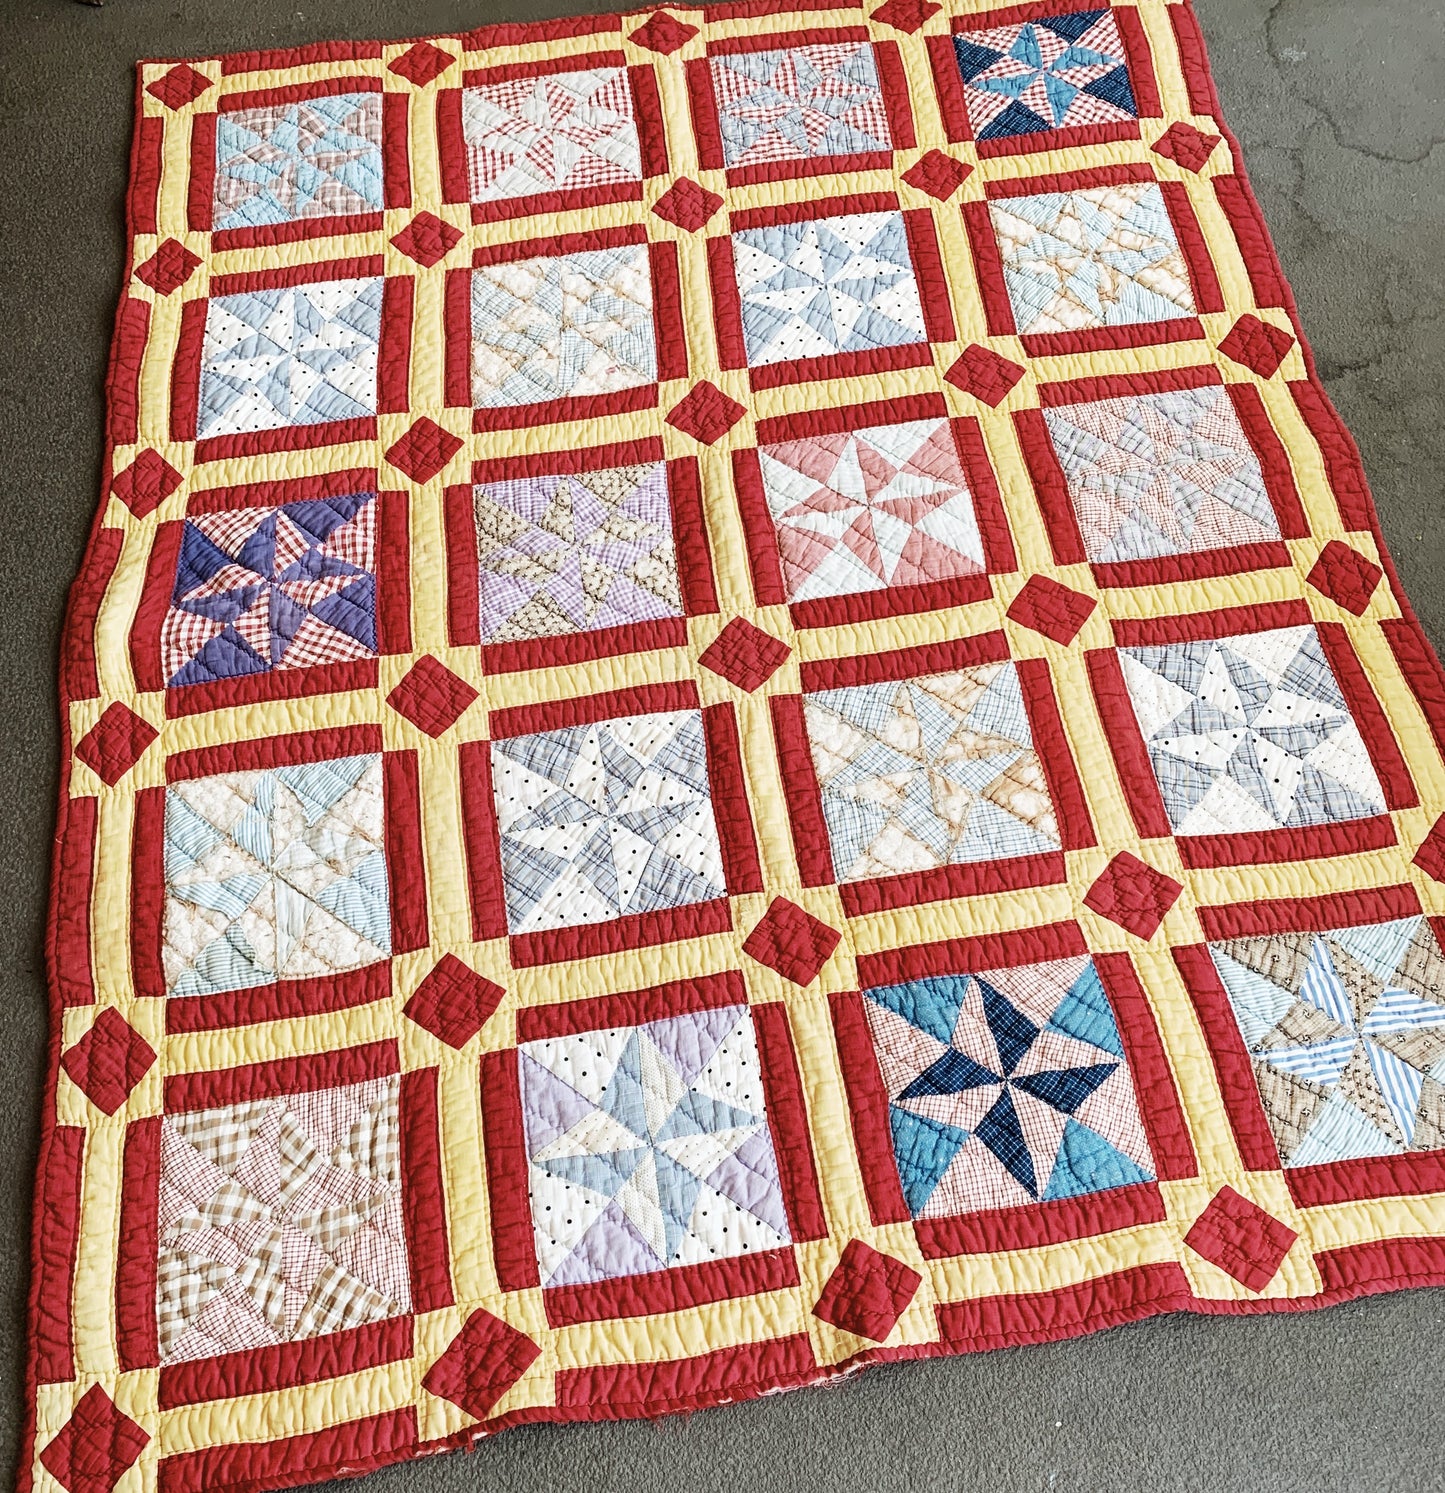 Antique Cotton Star and Diamond Patterned Quilt